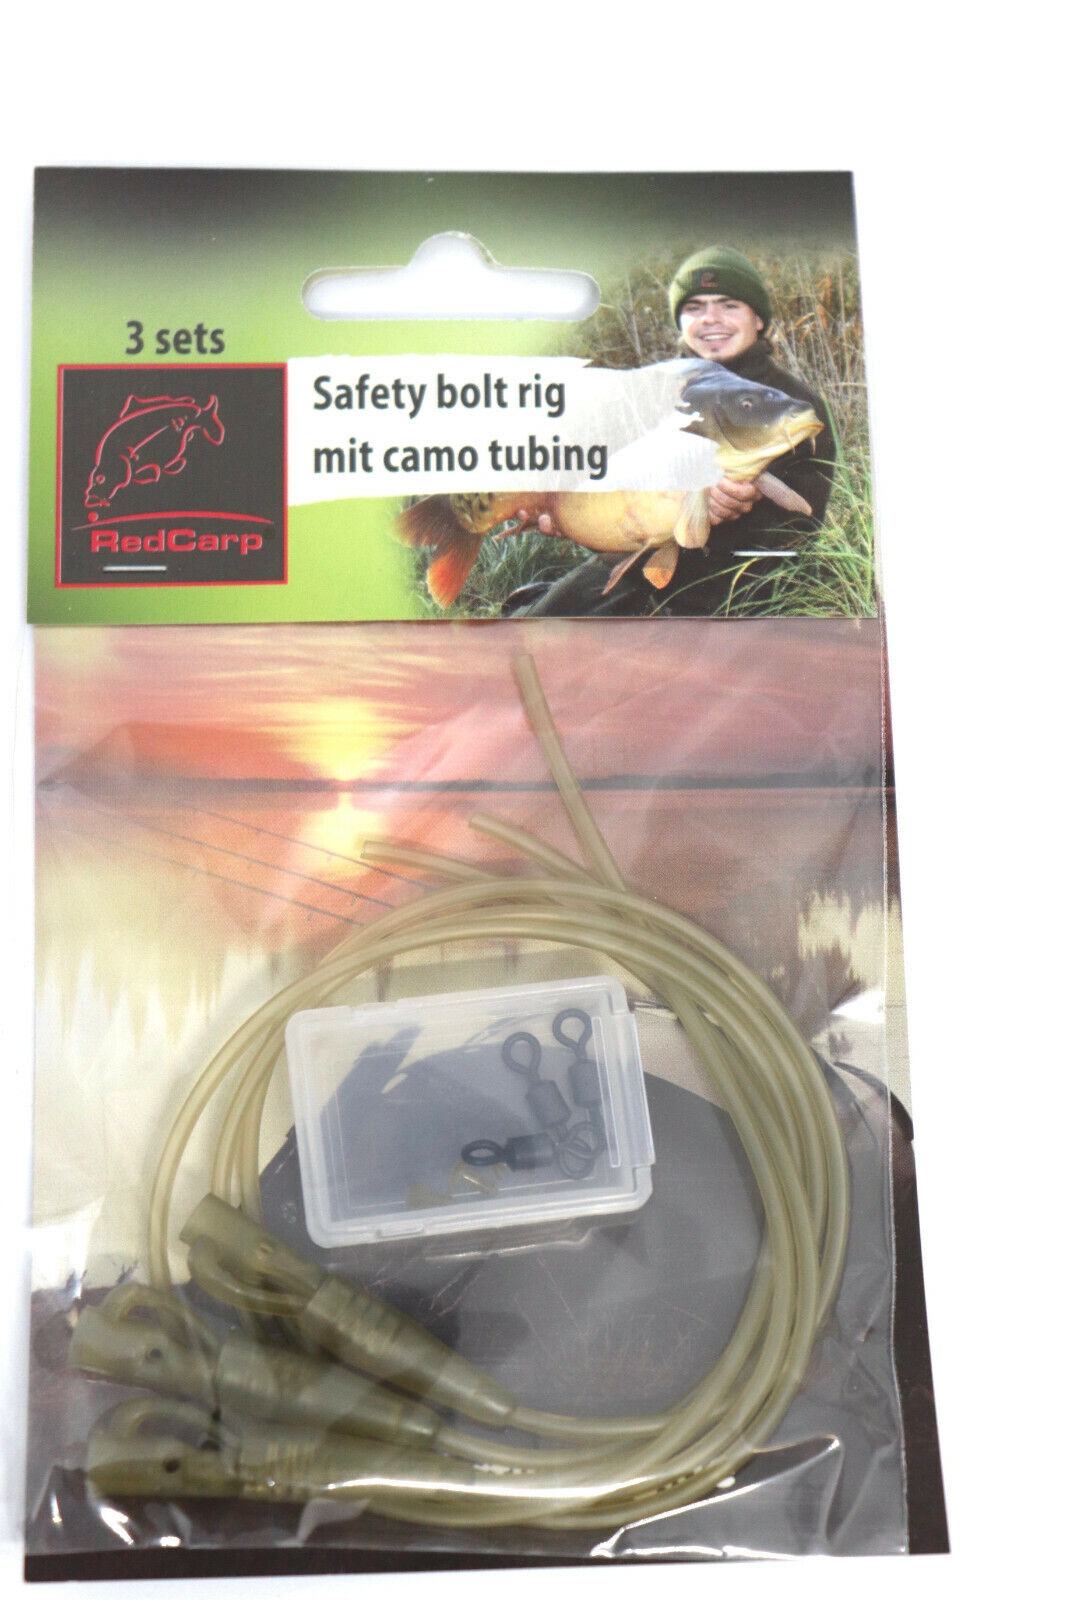 RED CARP 3St Safety bolt rig camo tubing